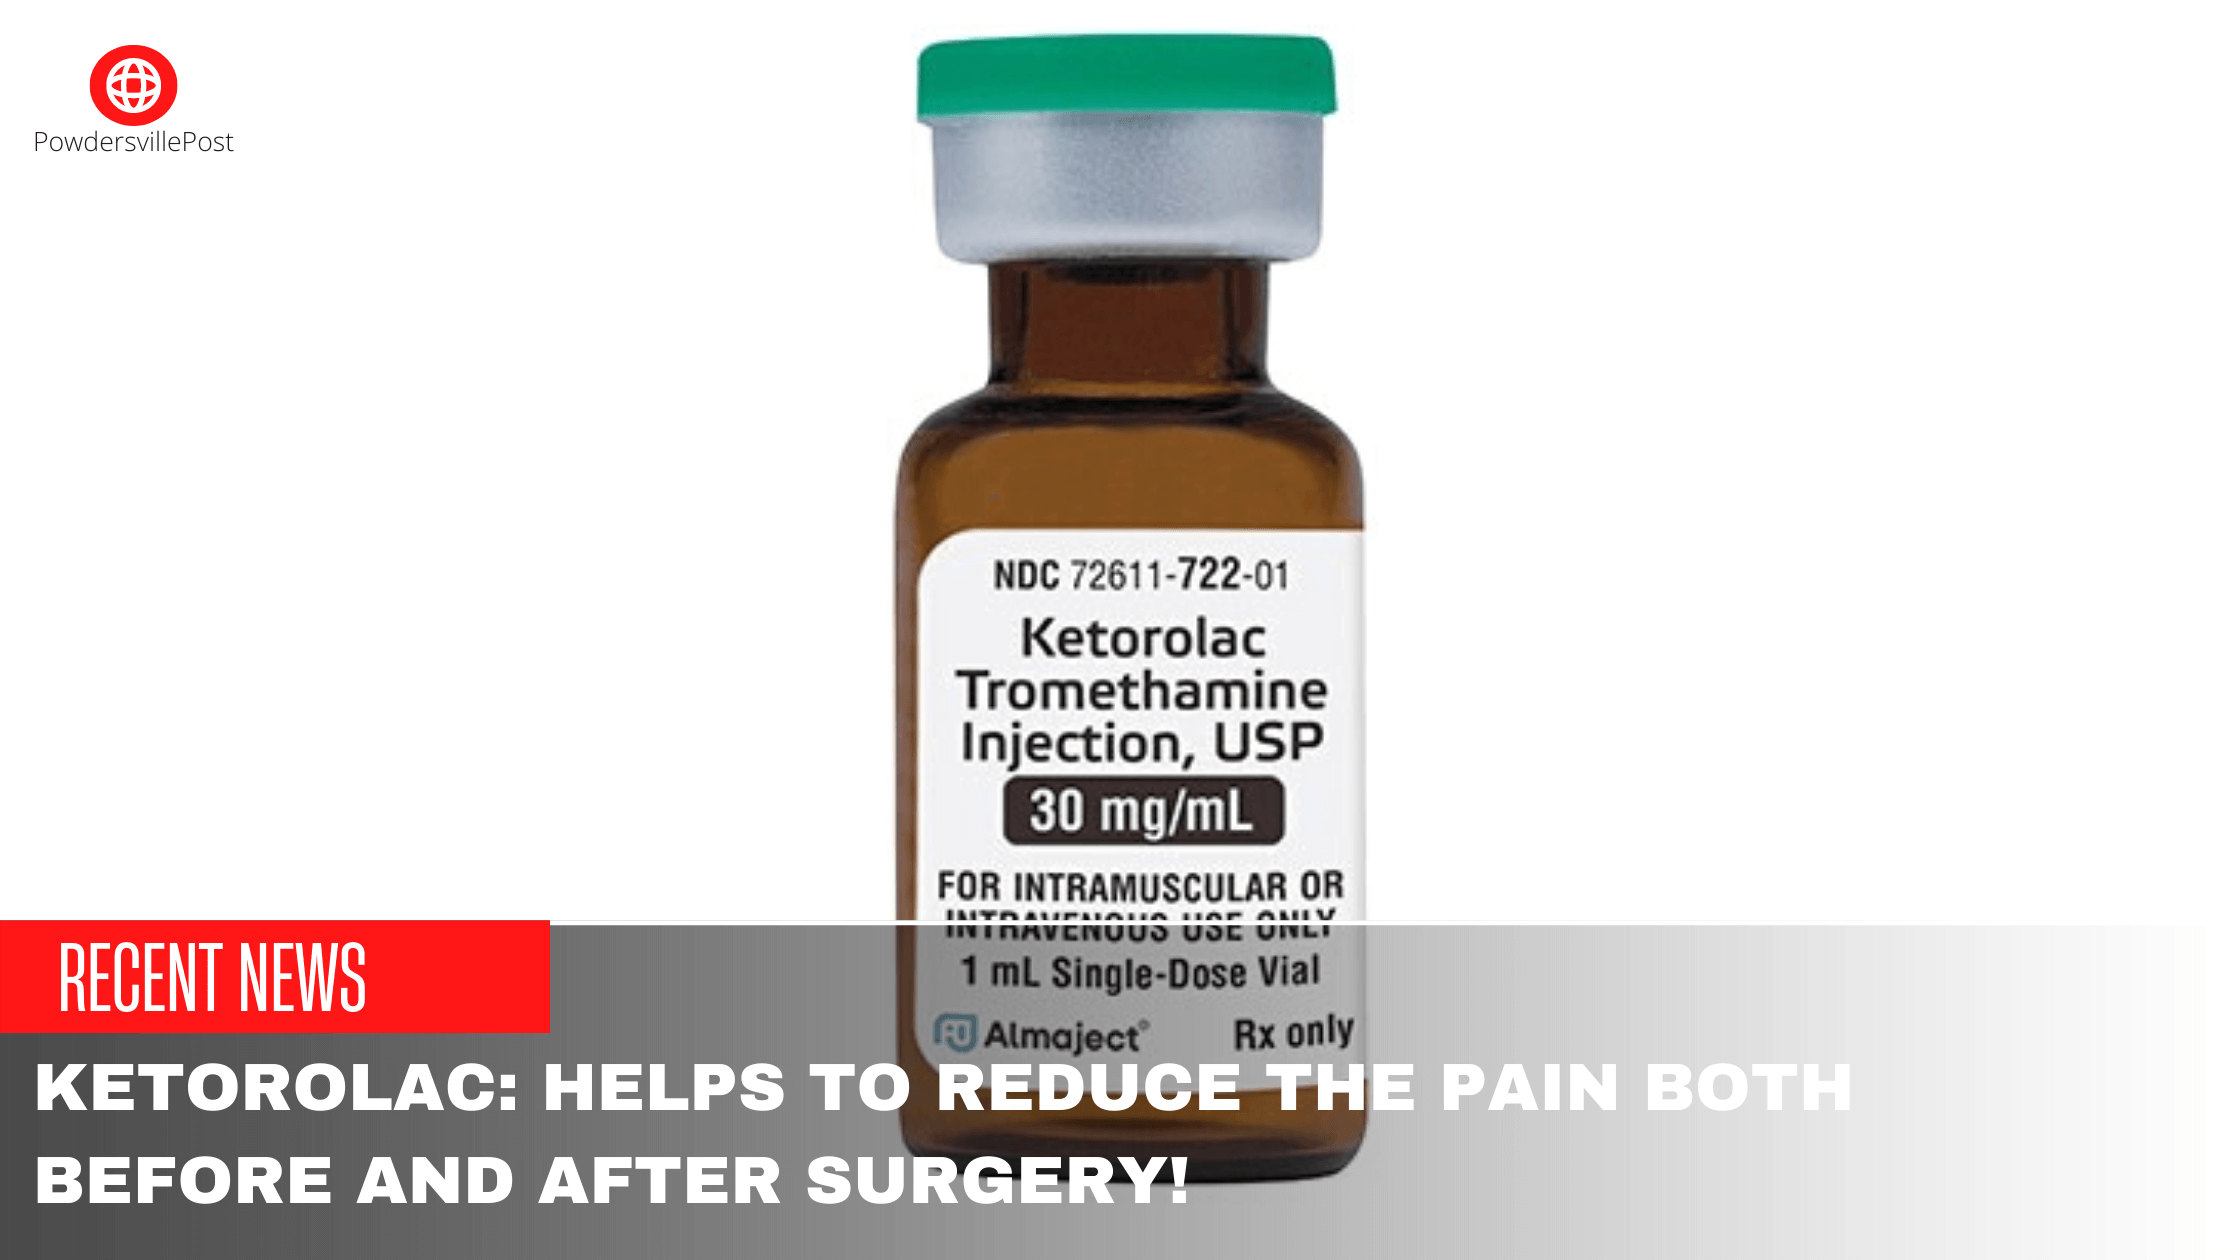 Ketorolac Helps To Reduce The Pain Both Before And After Surgery!